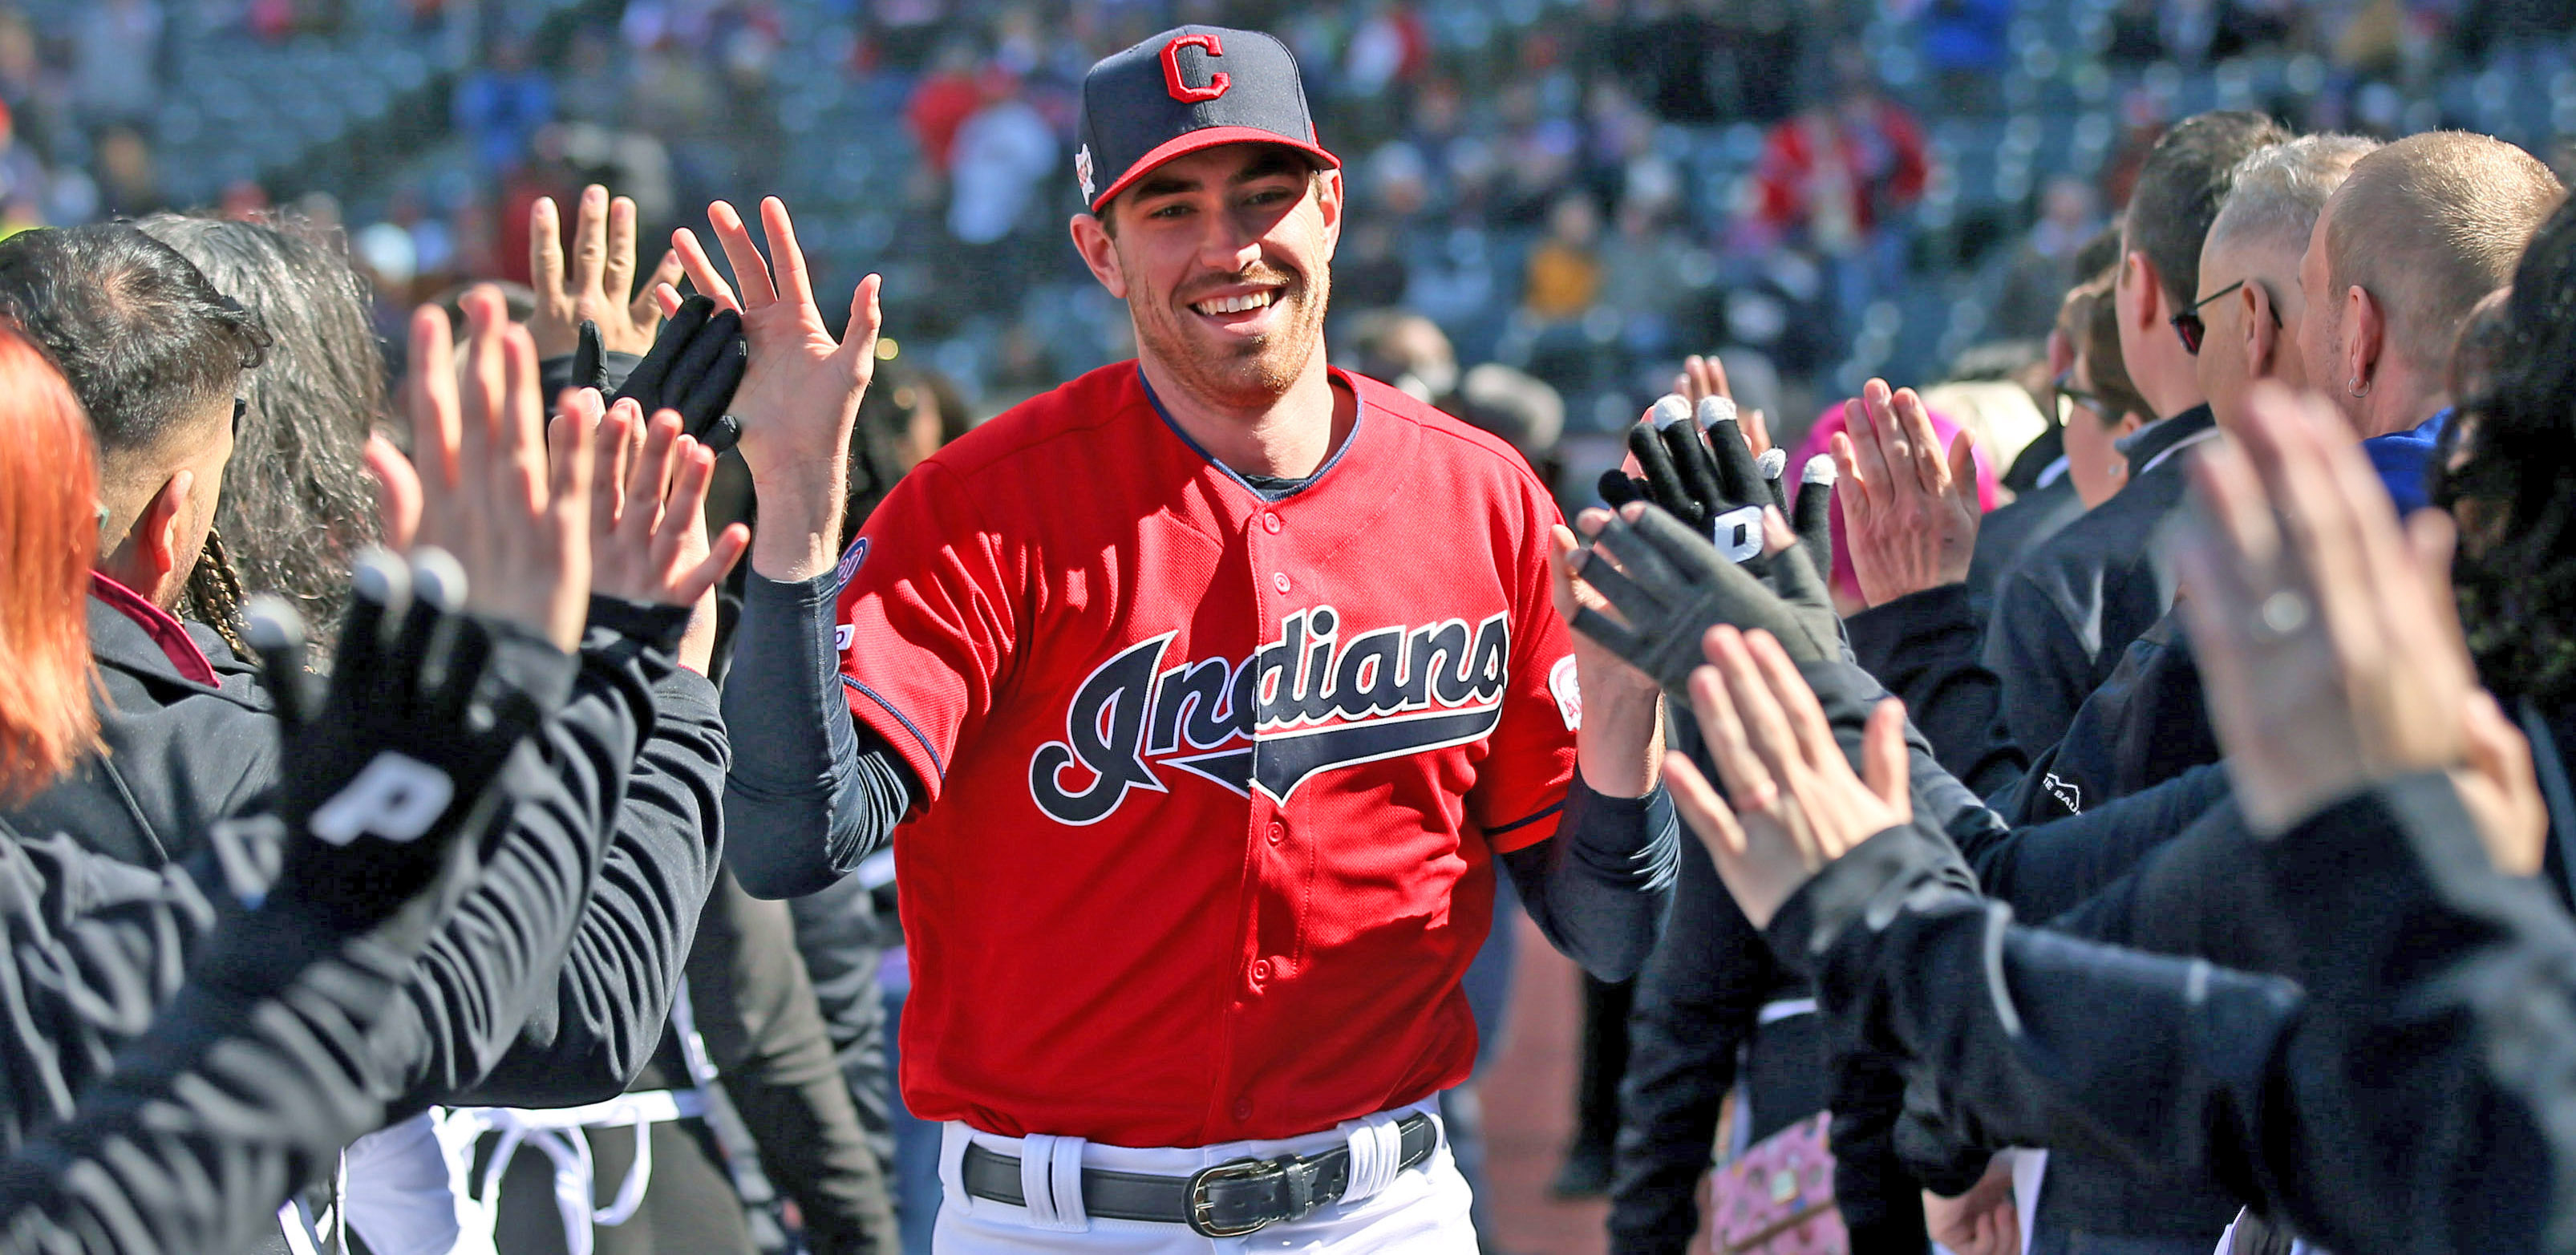 Trevor Bauer attends Indians game day after trade to Reds